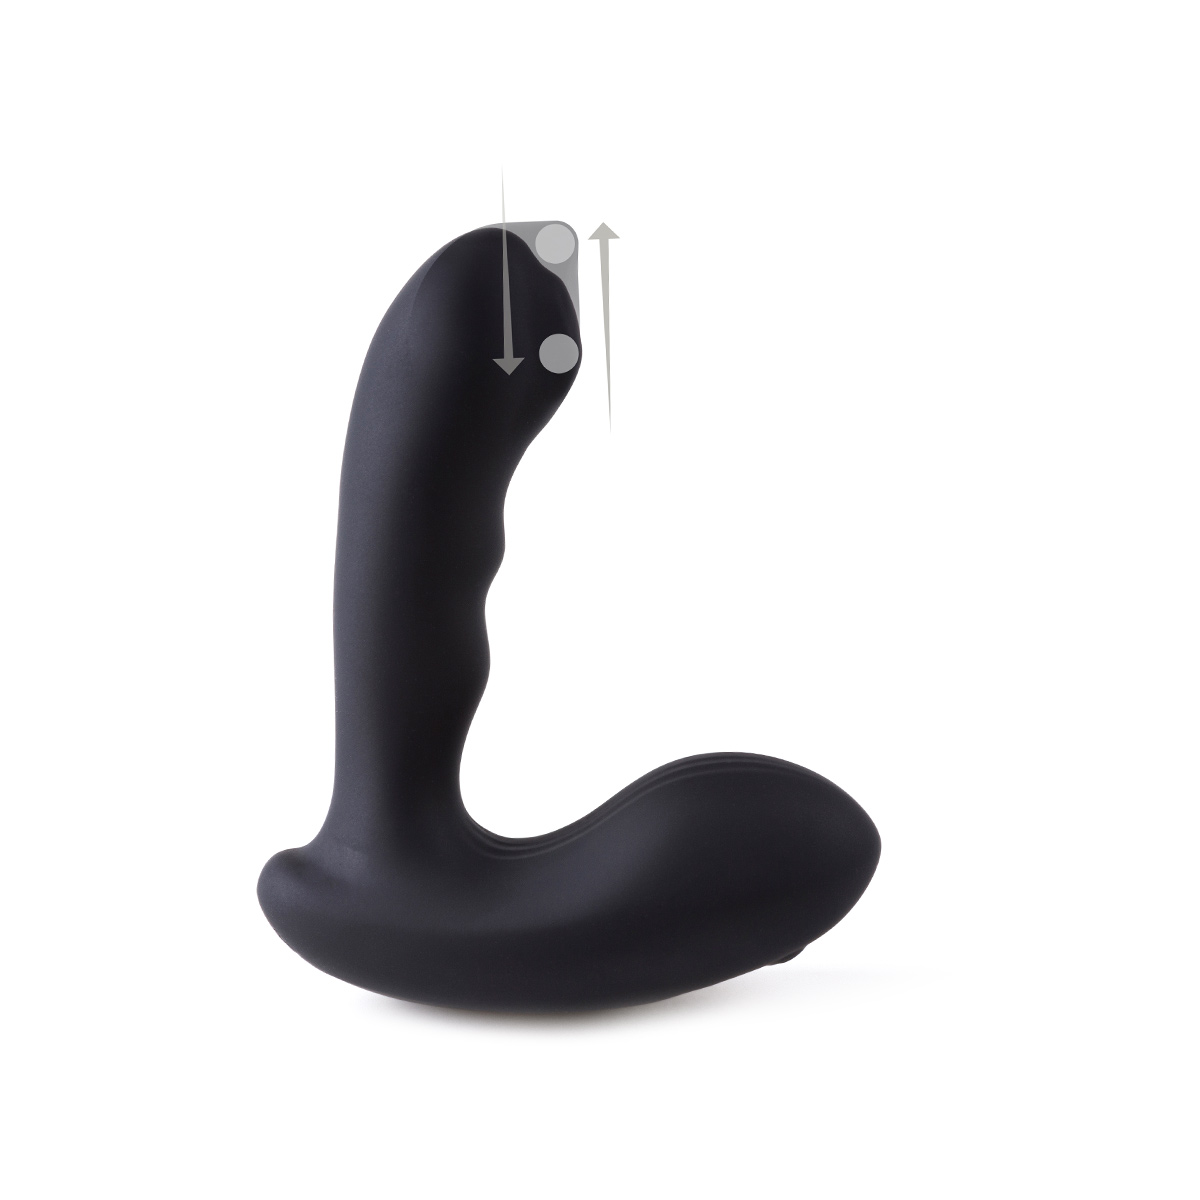 Moving-Beads-Prostate-Massager-with-Remote-P3-OPR-3090100-4